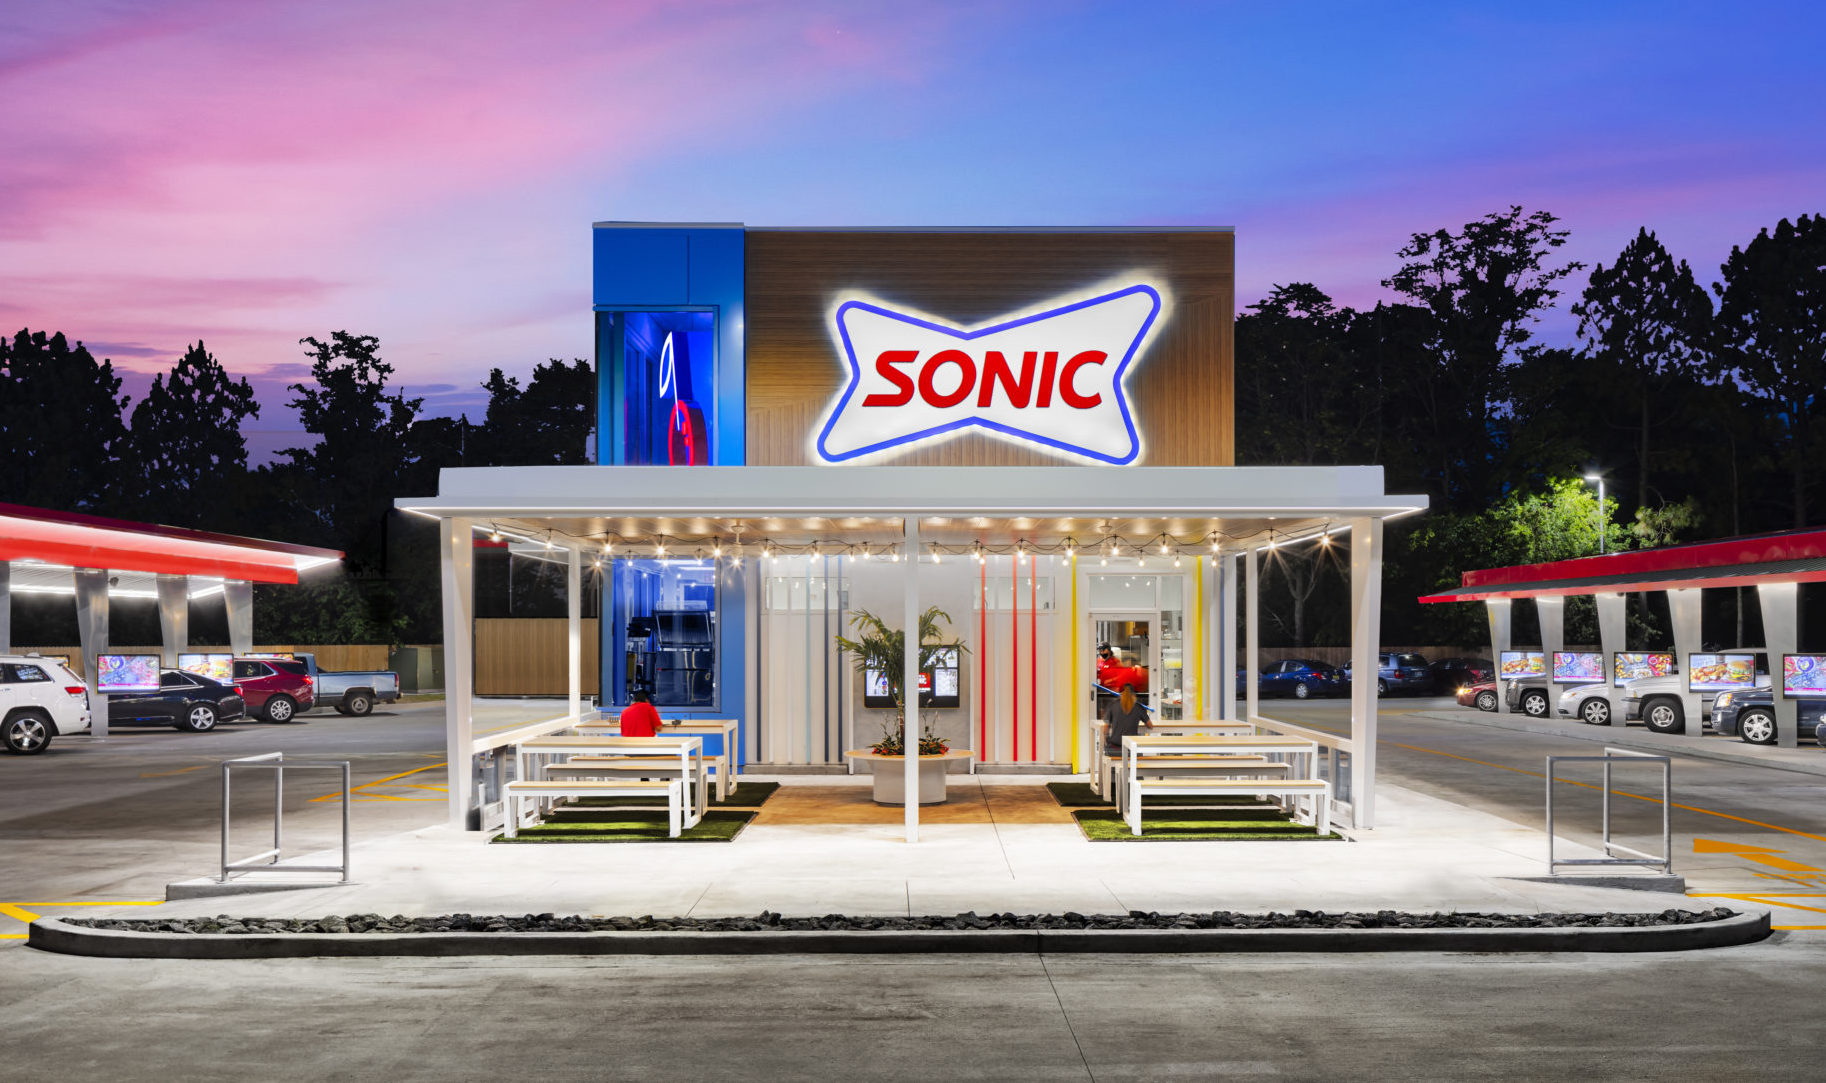 Does Sonic take Apple Pay?